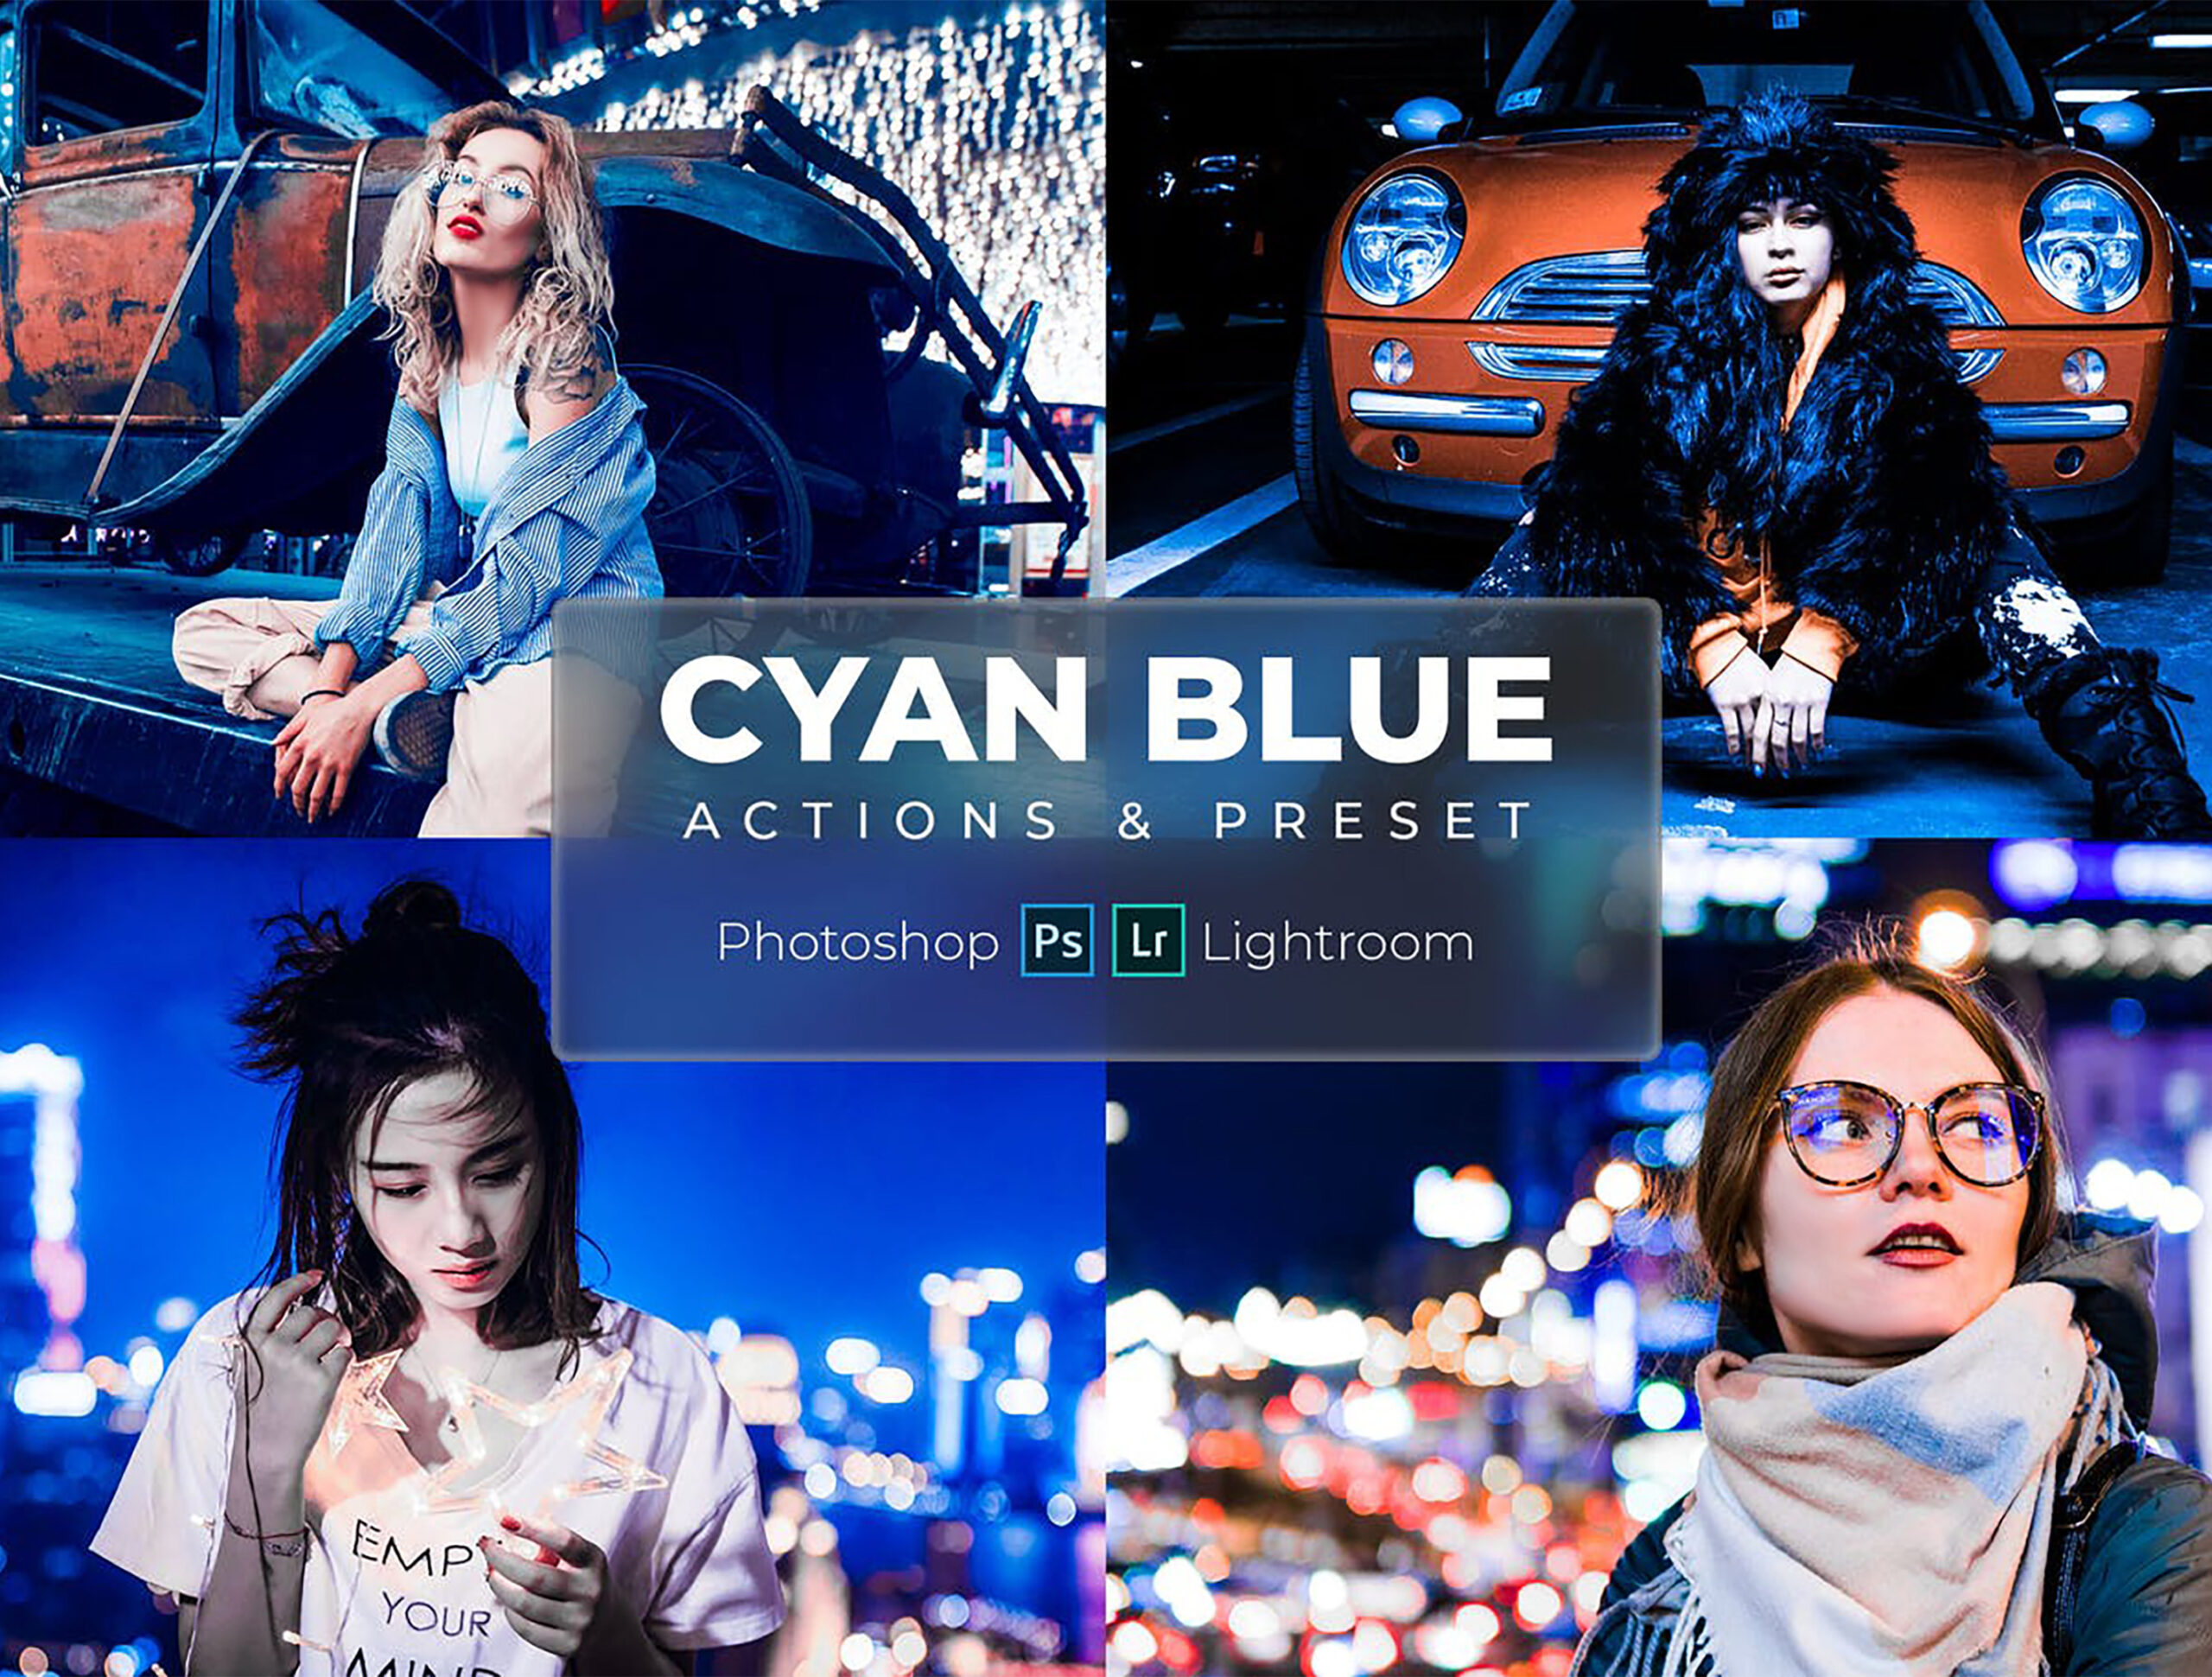 Photoshop Actions & Lightroom Presets – Cyan Blue [FREE DOWNLOAD]